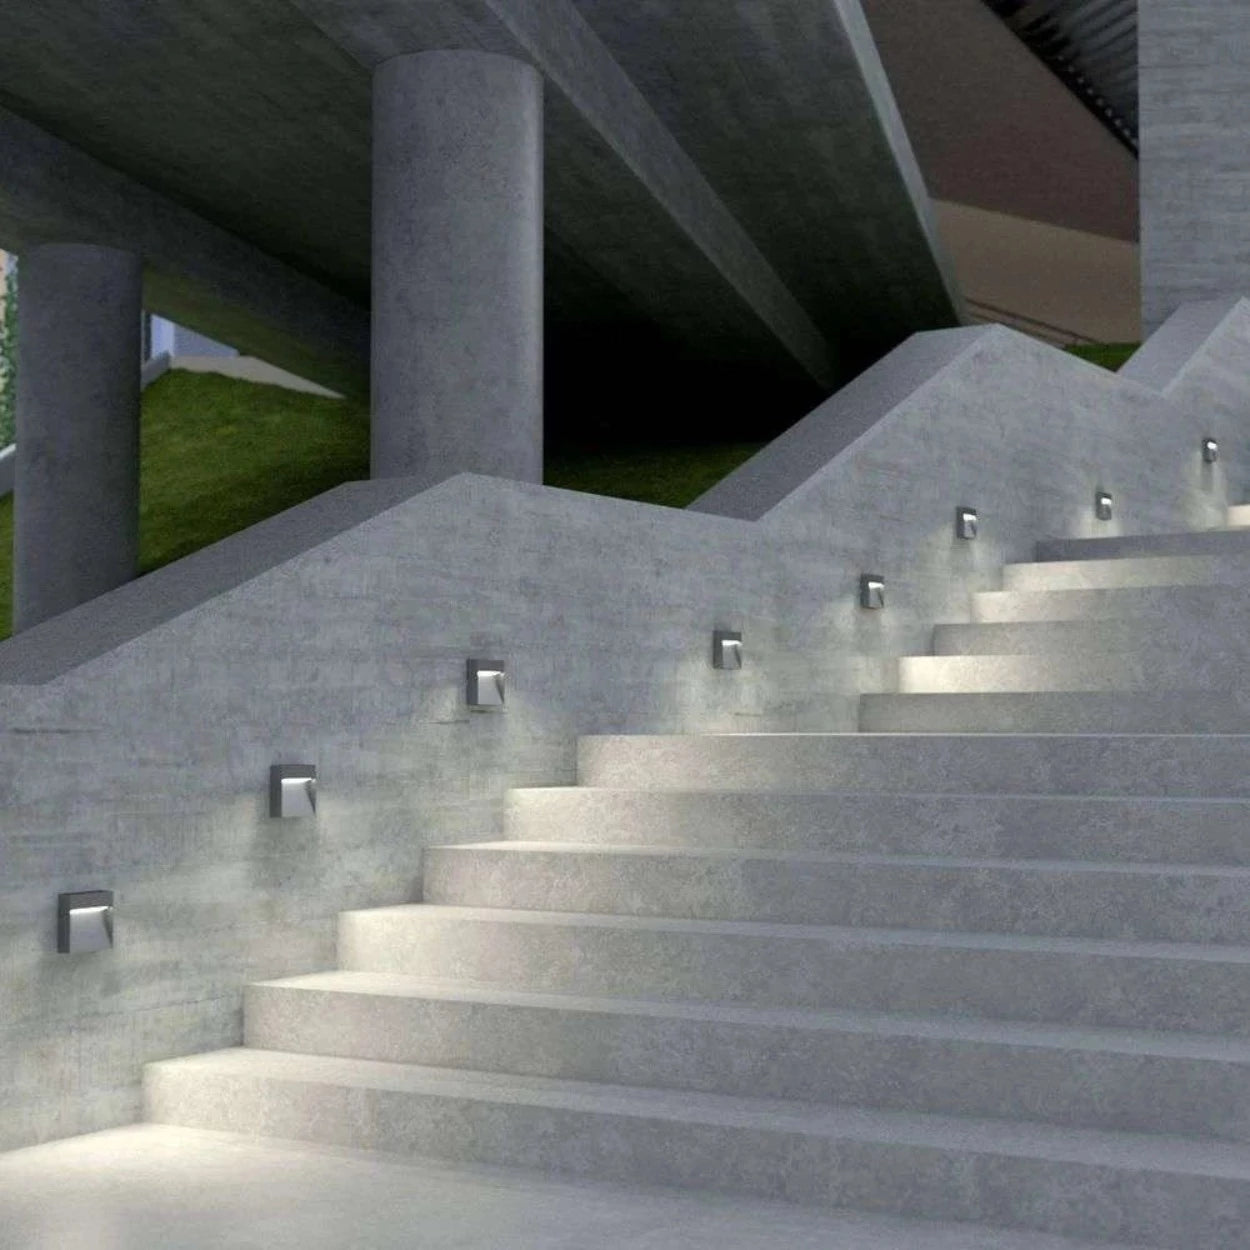 ANKUR SQUARE SURFACE OUTDOOR RATED LED FOOT LIGHT FOR ROOMS, STAIRCASES OR PATHWAYS